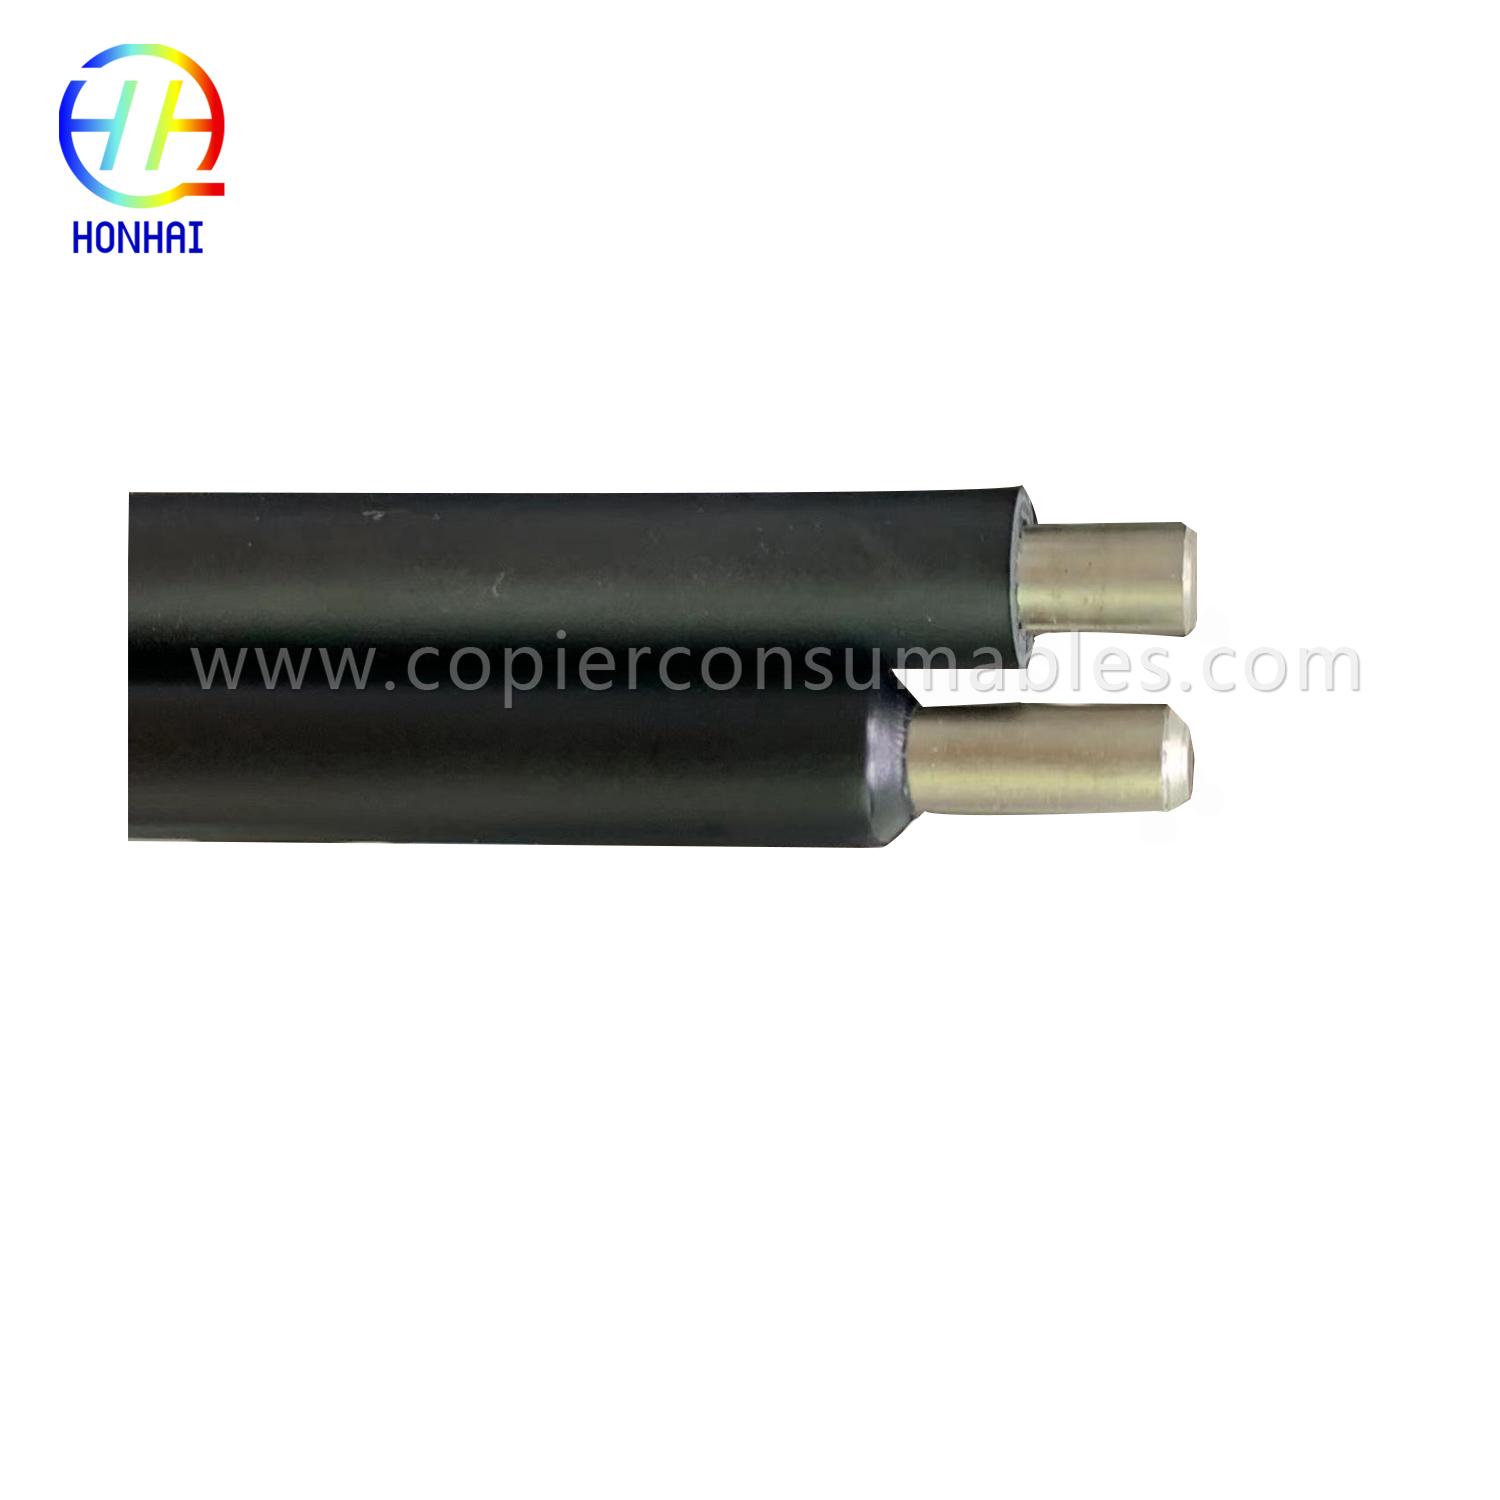 Primary Charge Roller for HP LaserJet 9000 9040 9050 (RG5-5750-000 C8519-69035 C8519-69033)